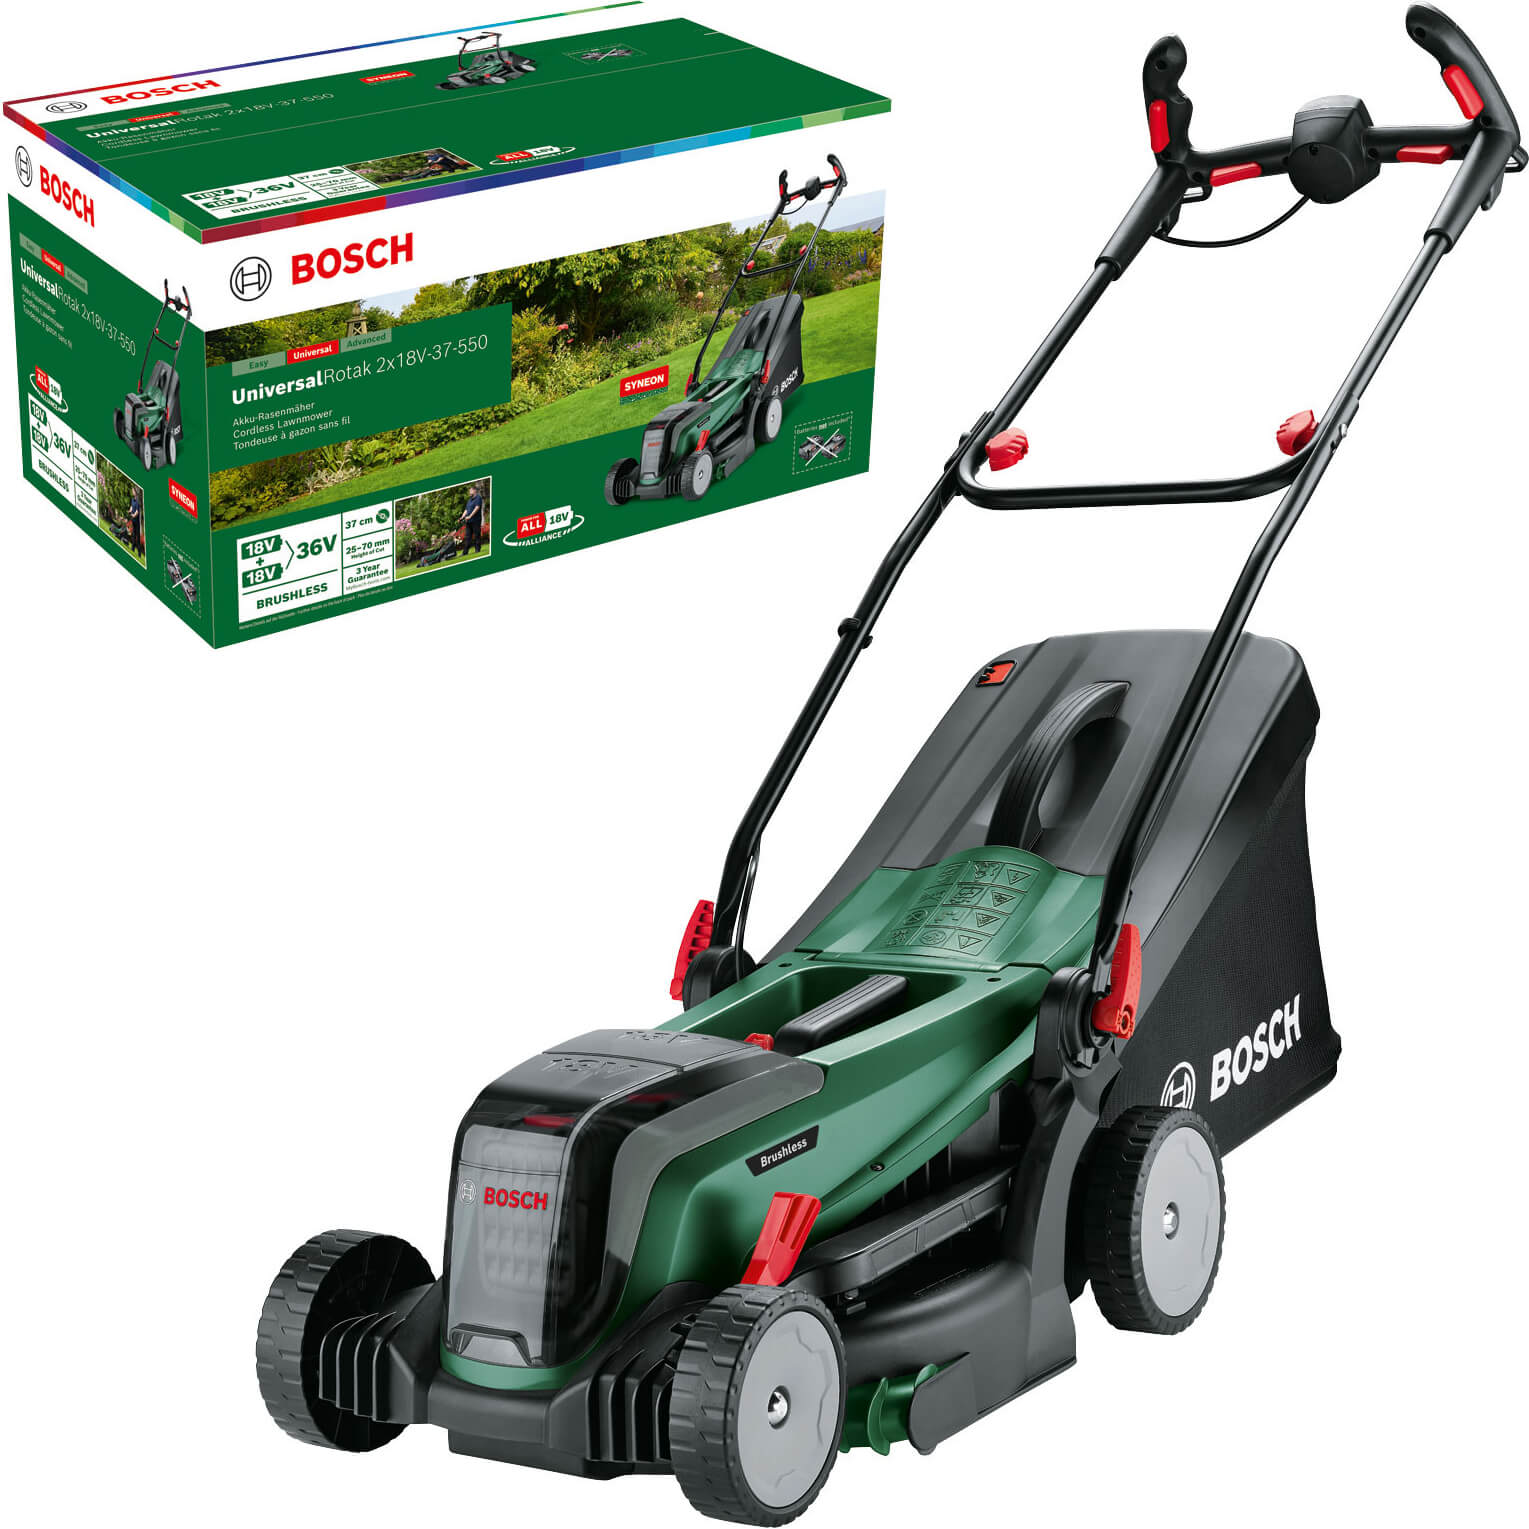 Image of Bosch UNIVERSALROTAK 2X18V-37-550 36v Cordless Rotary Lawnmower 370mm No Batteries No Charger